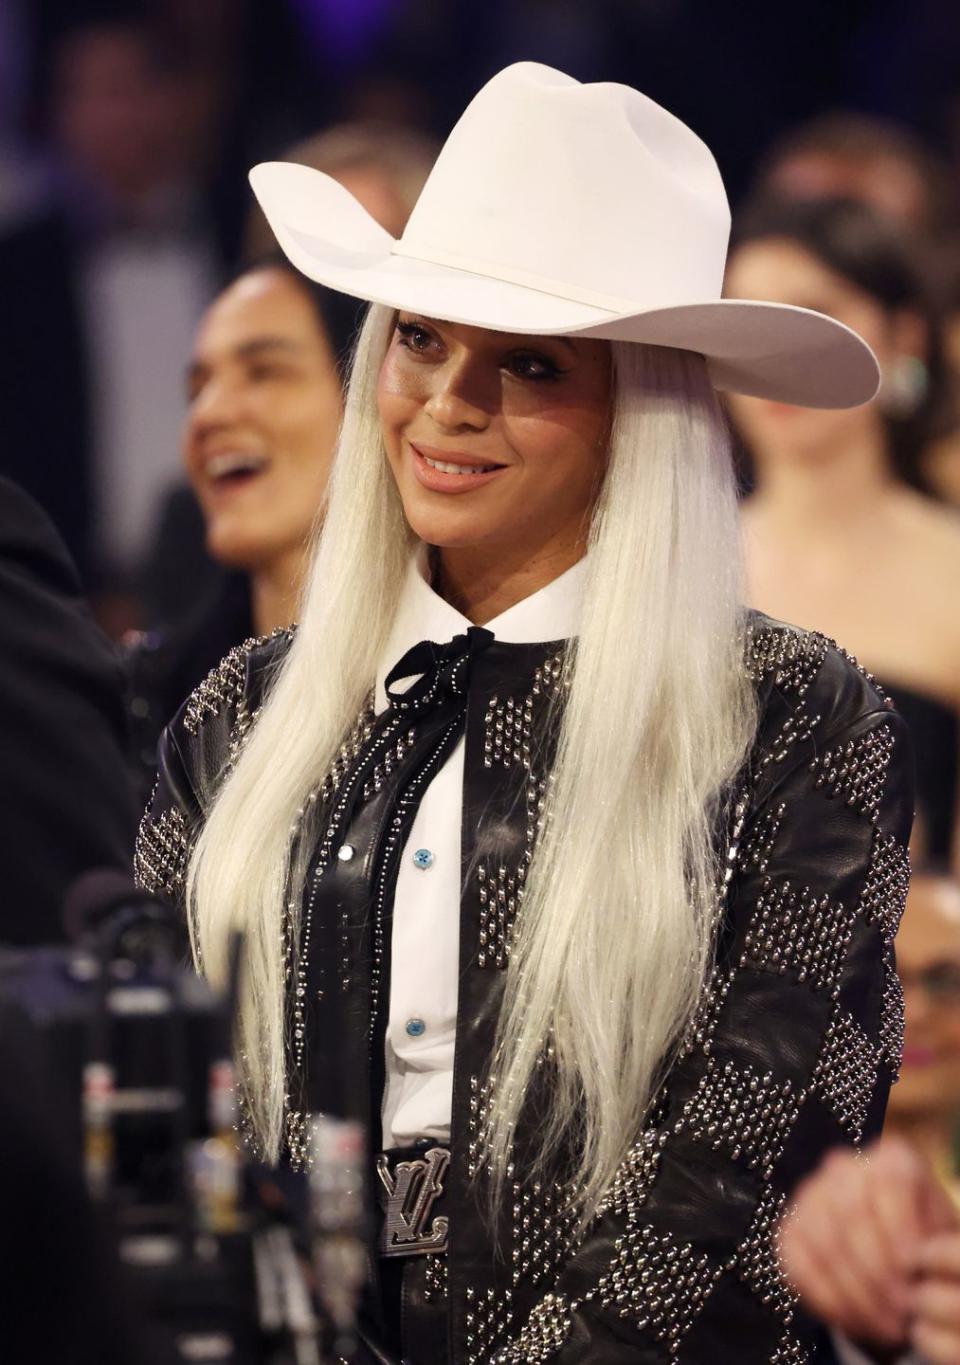 beyonce wearing a white cowboy hat and black and white country attire while attending the grammy awards